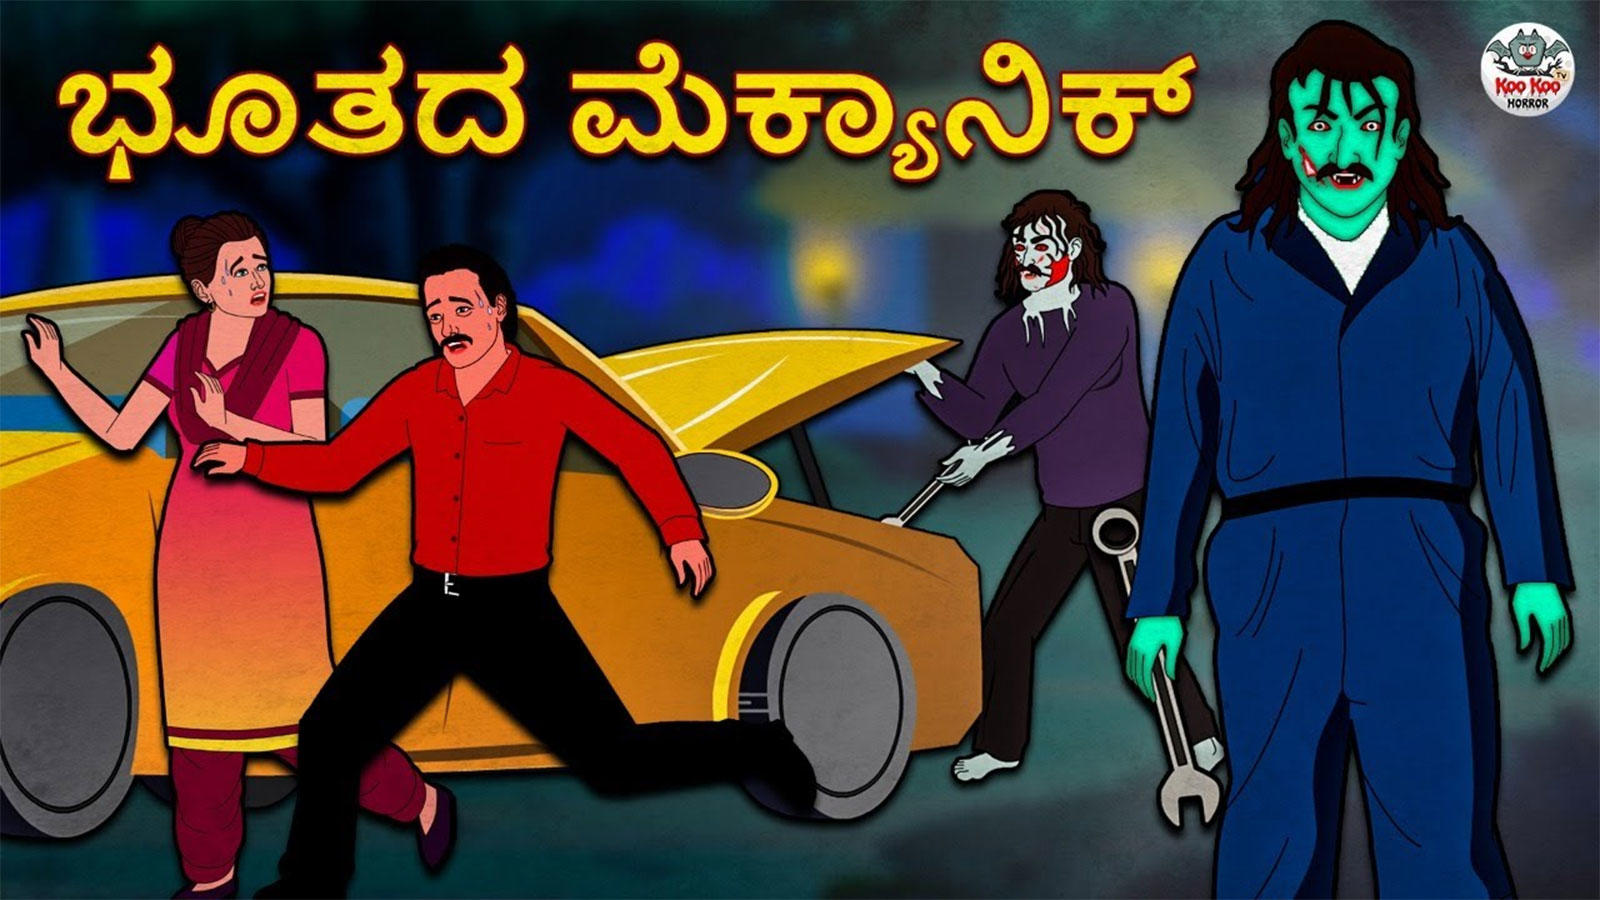 Check Out Latest Kids Kannada Nursery Story 'ಭೂತದ ಮೆಕ್ಯಾನಿಕ್ -The Haunted  Mechanic' for Kids - Watch Children's Nursery Stories, Baby Songs, Fairy  Tales In Kannada | Entertainment - Times of India Videos